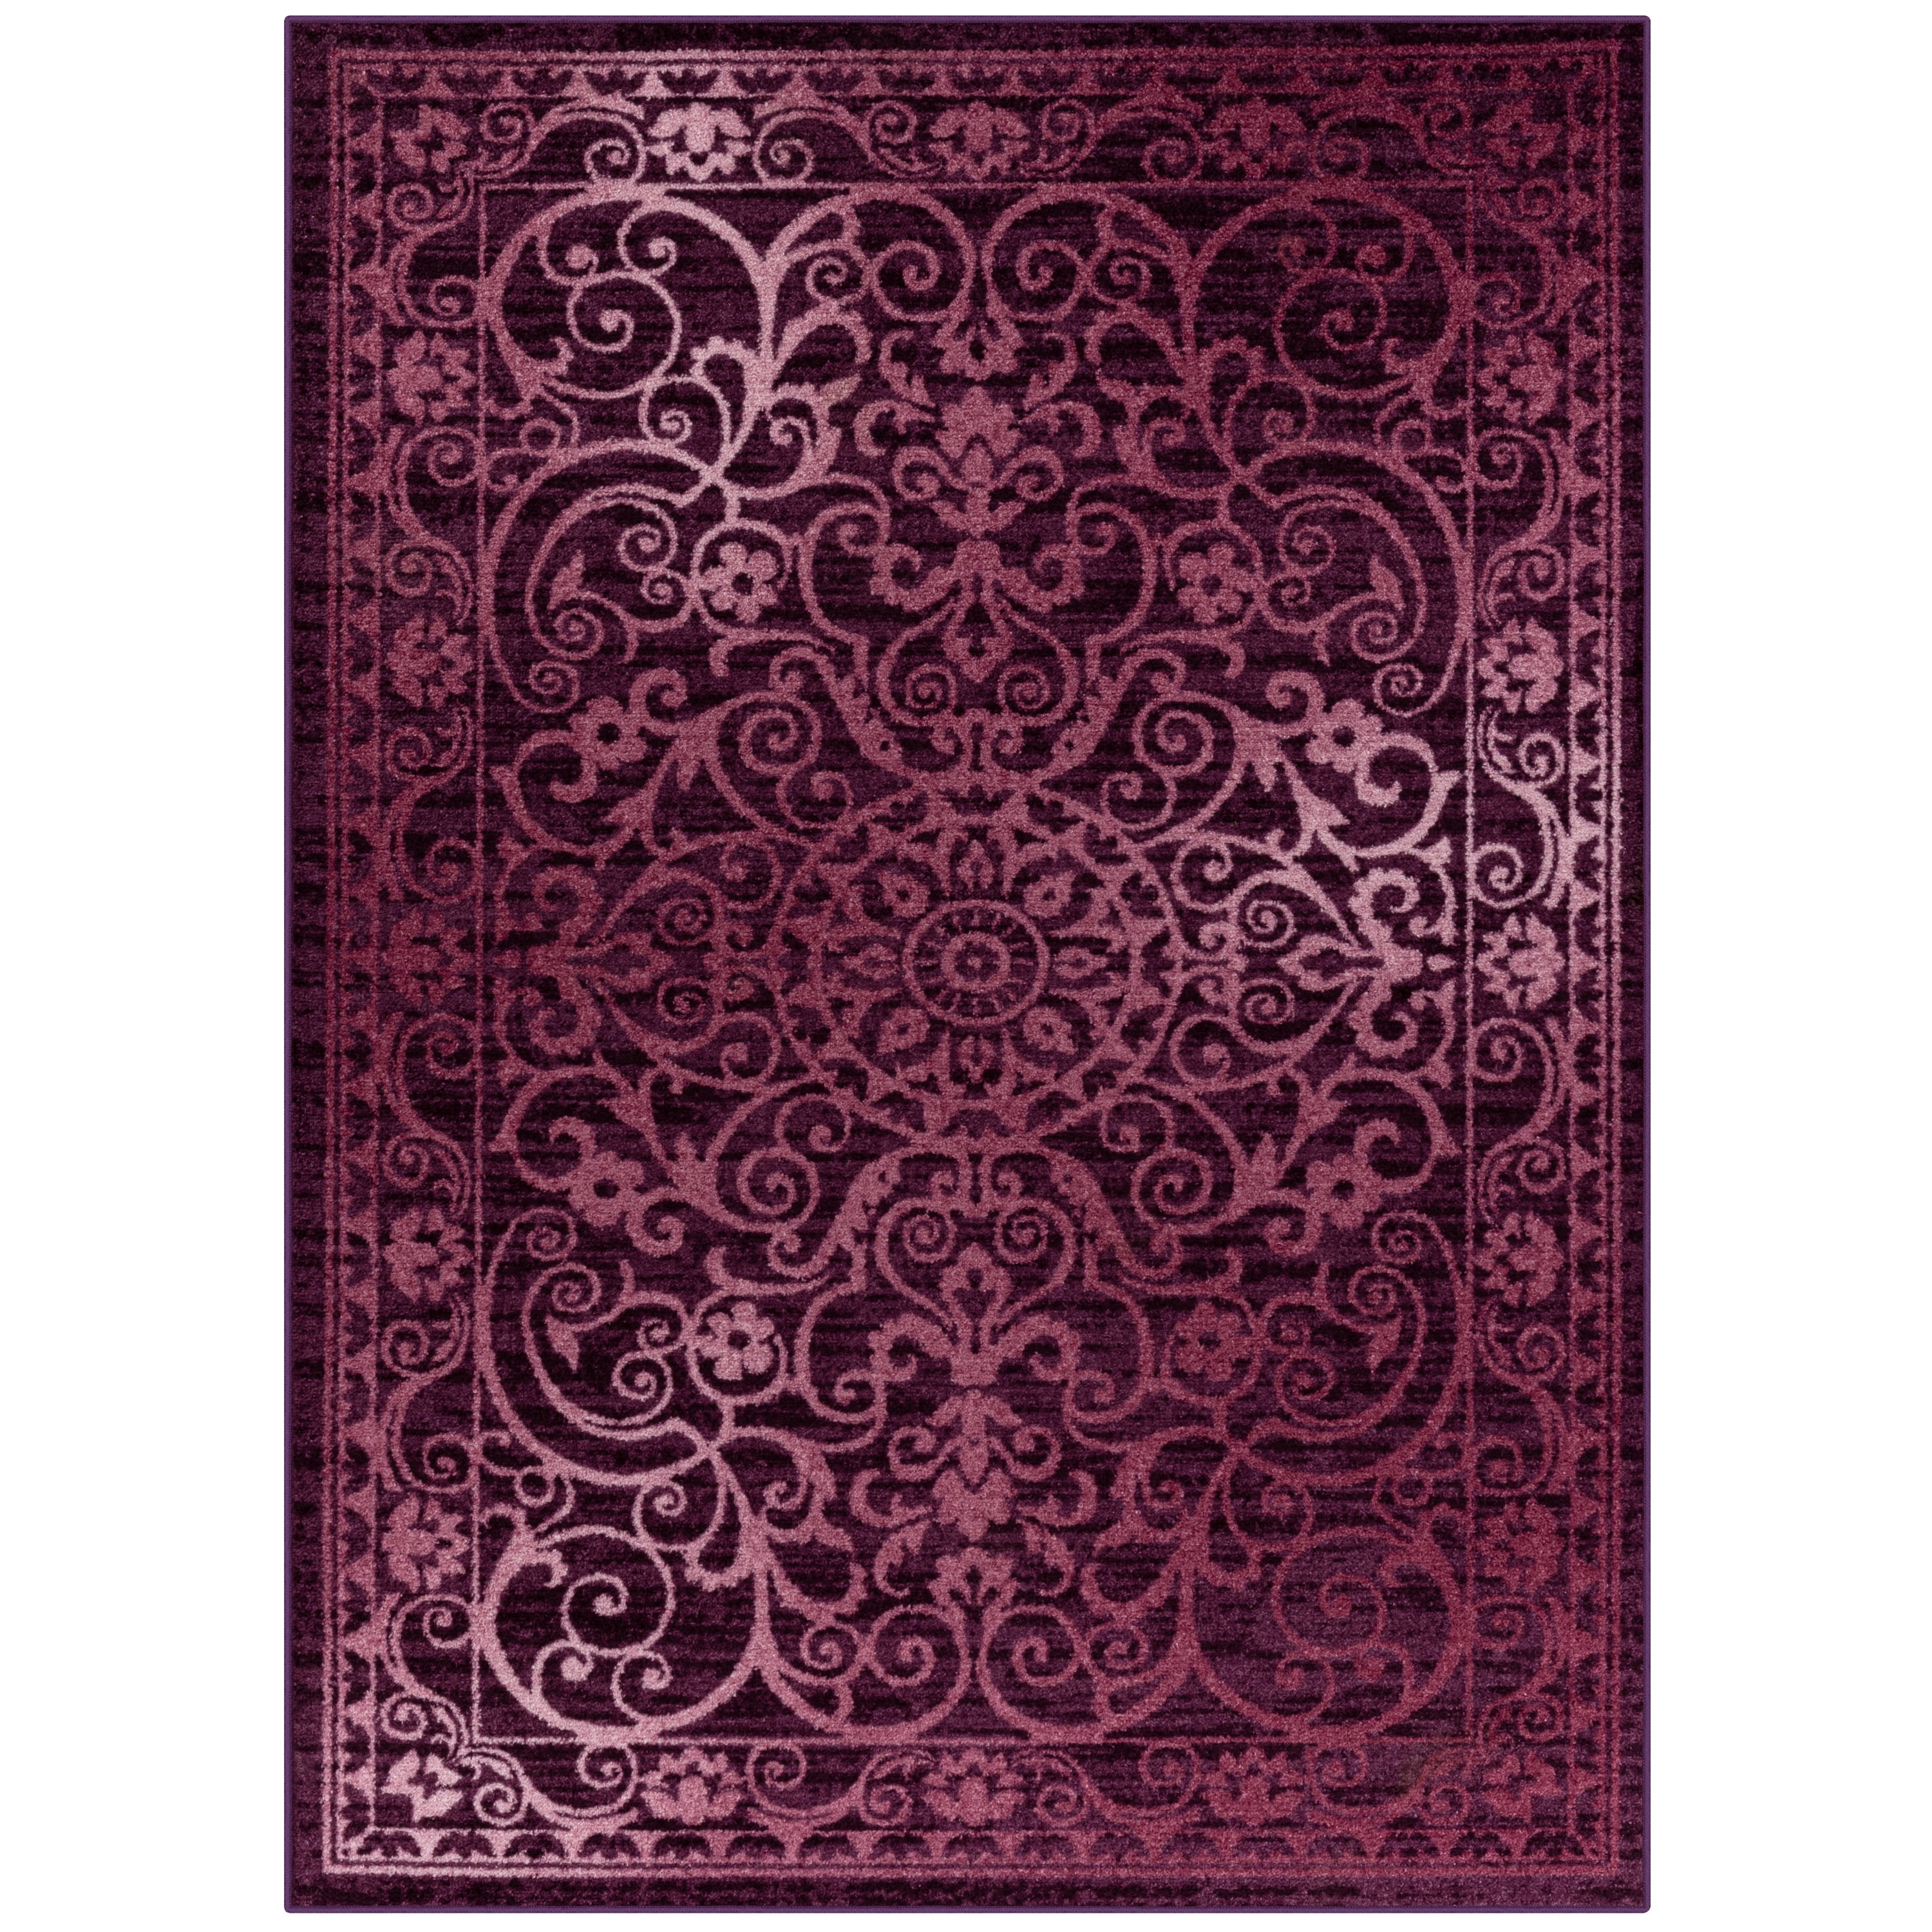 Vintage Distressed Style Runner Area Rug Scroll Damask Carpet Plum/Wineberry 2x6 